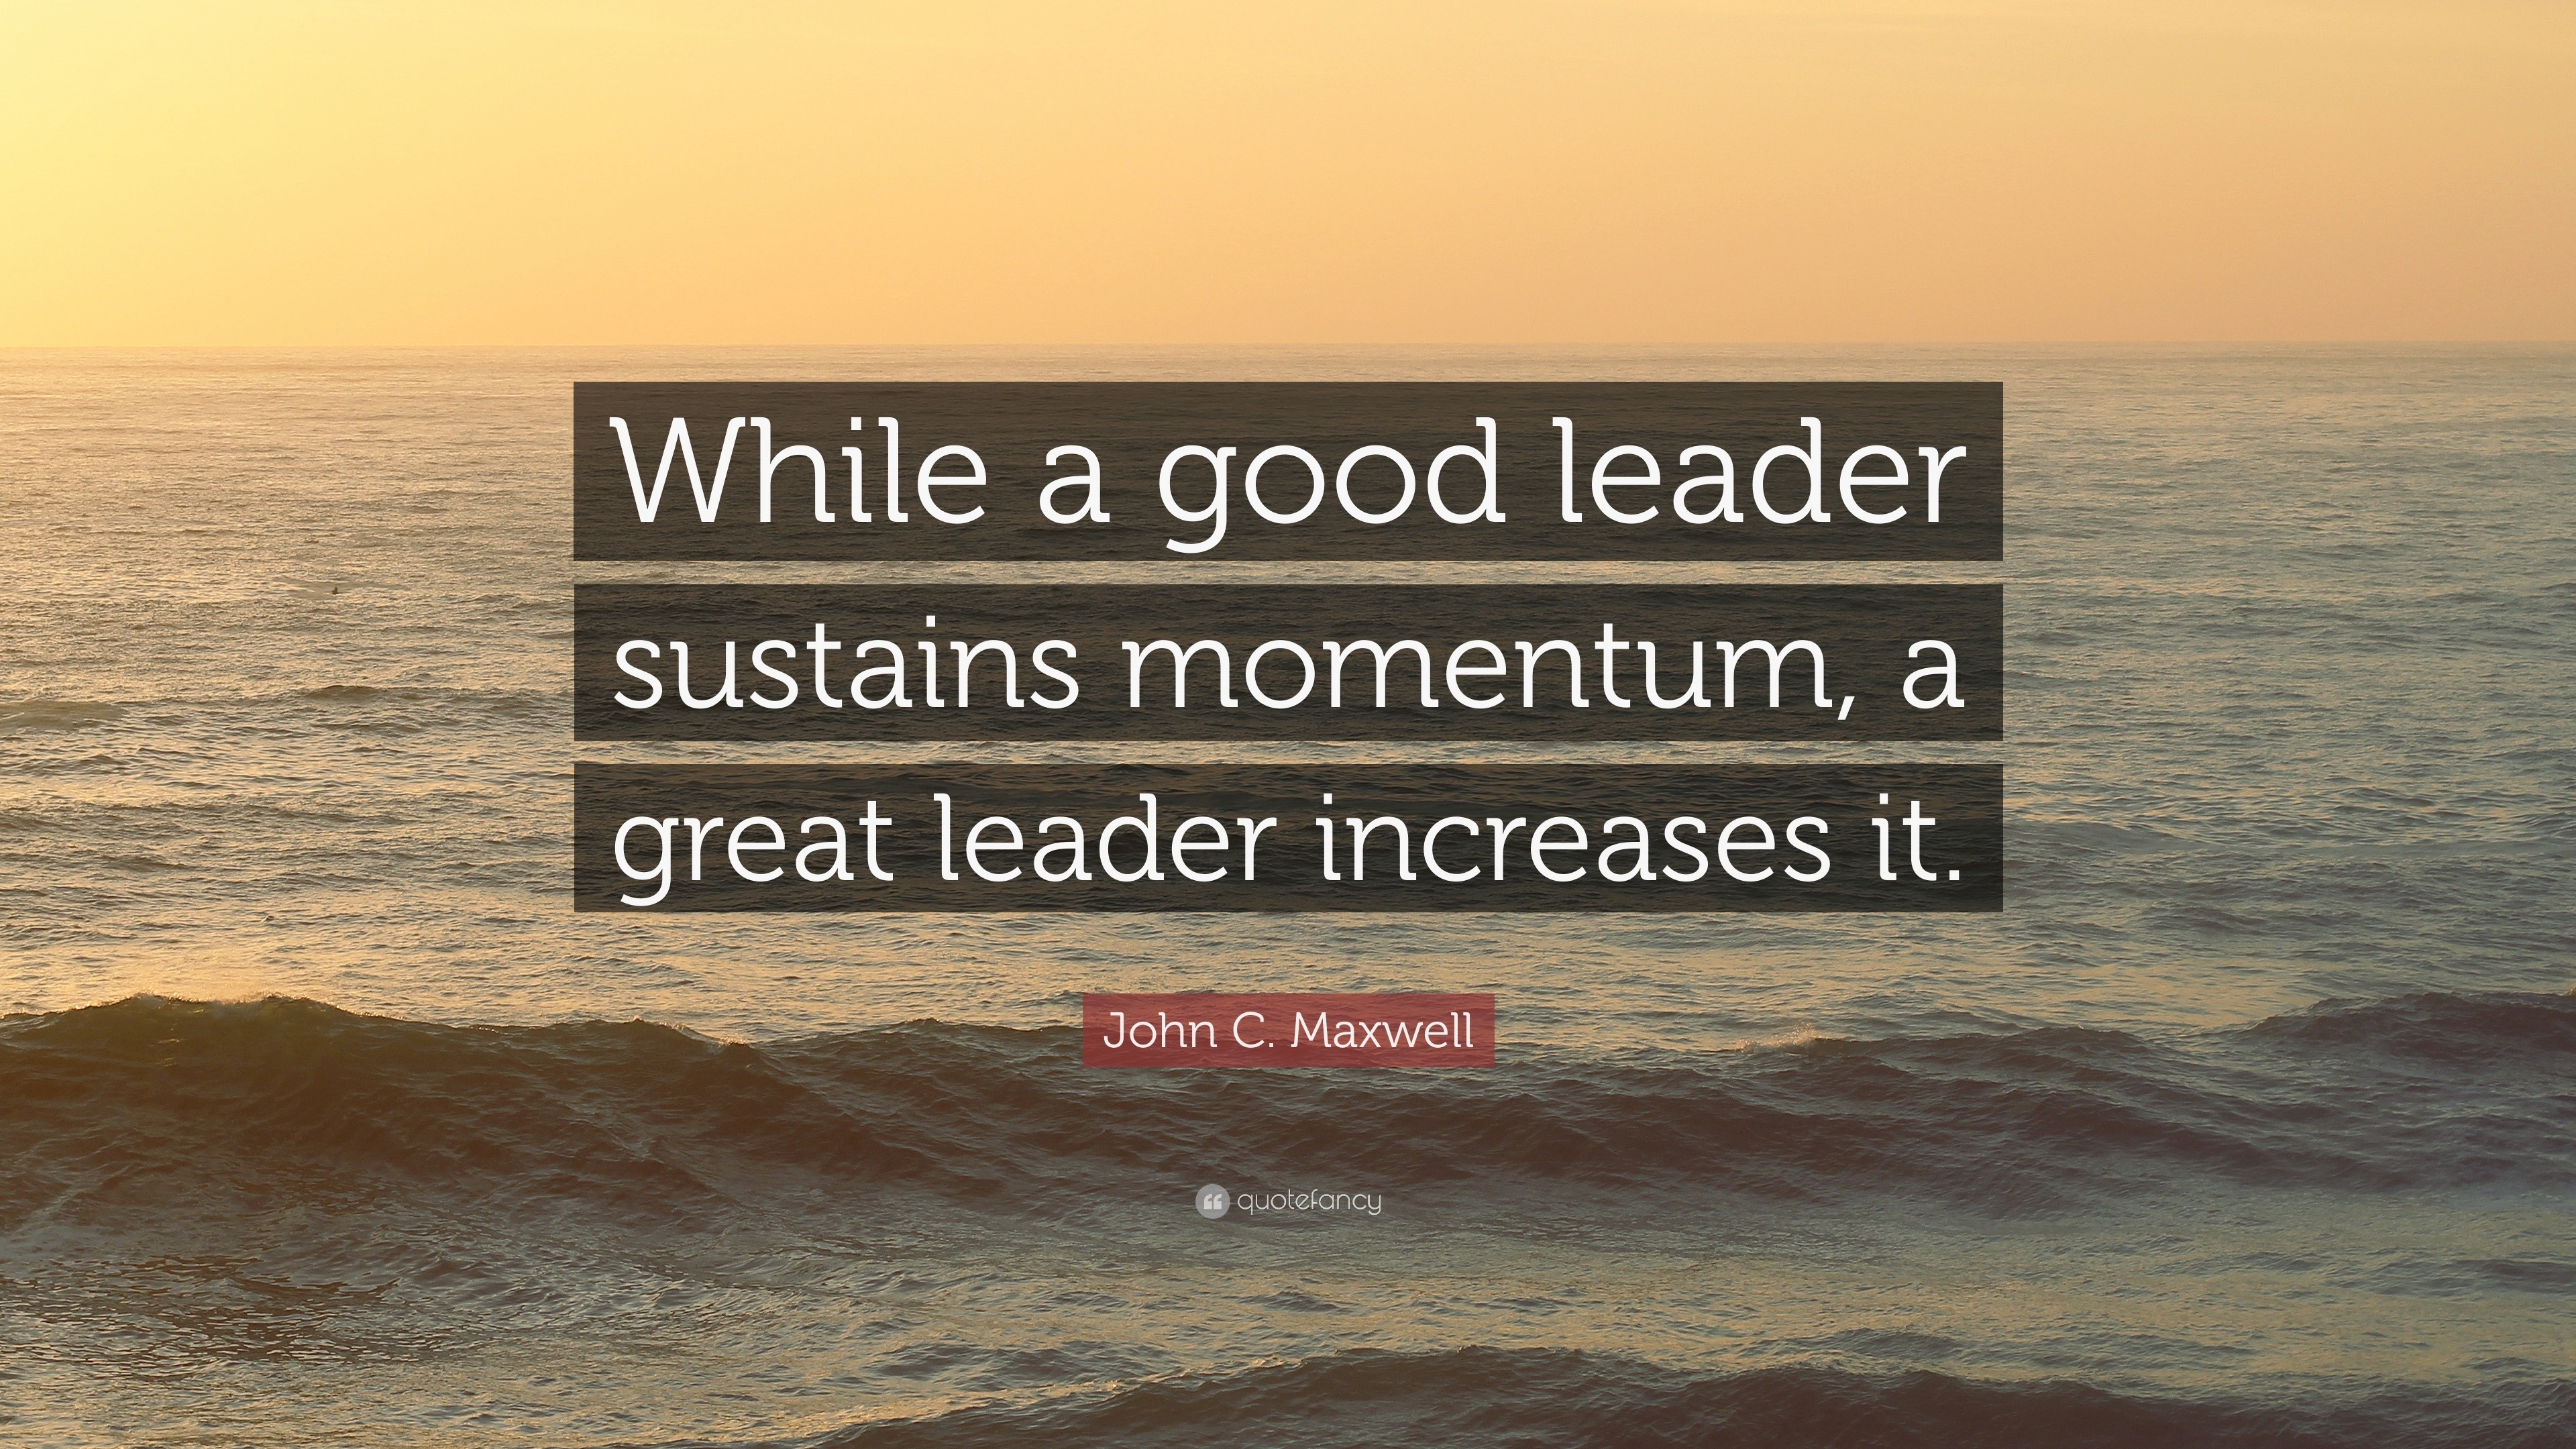 John C. Maxwell Quote: “While a good leader sustains momentum, a great